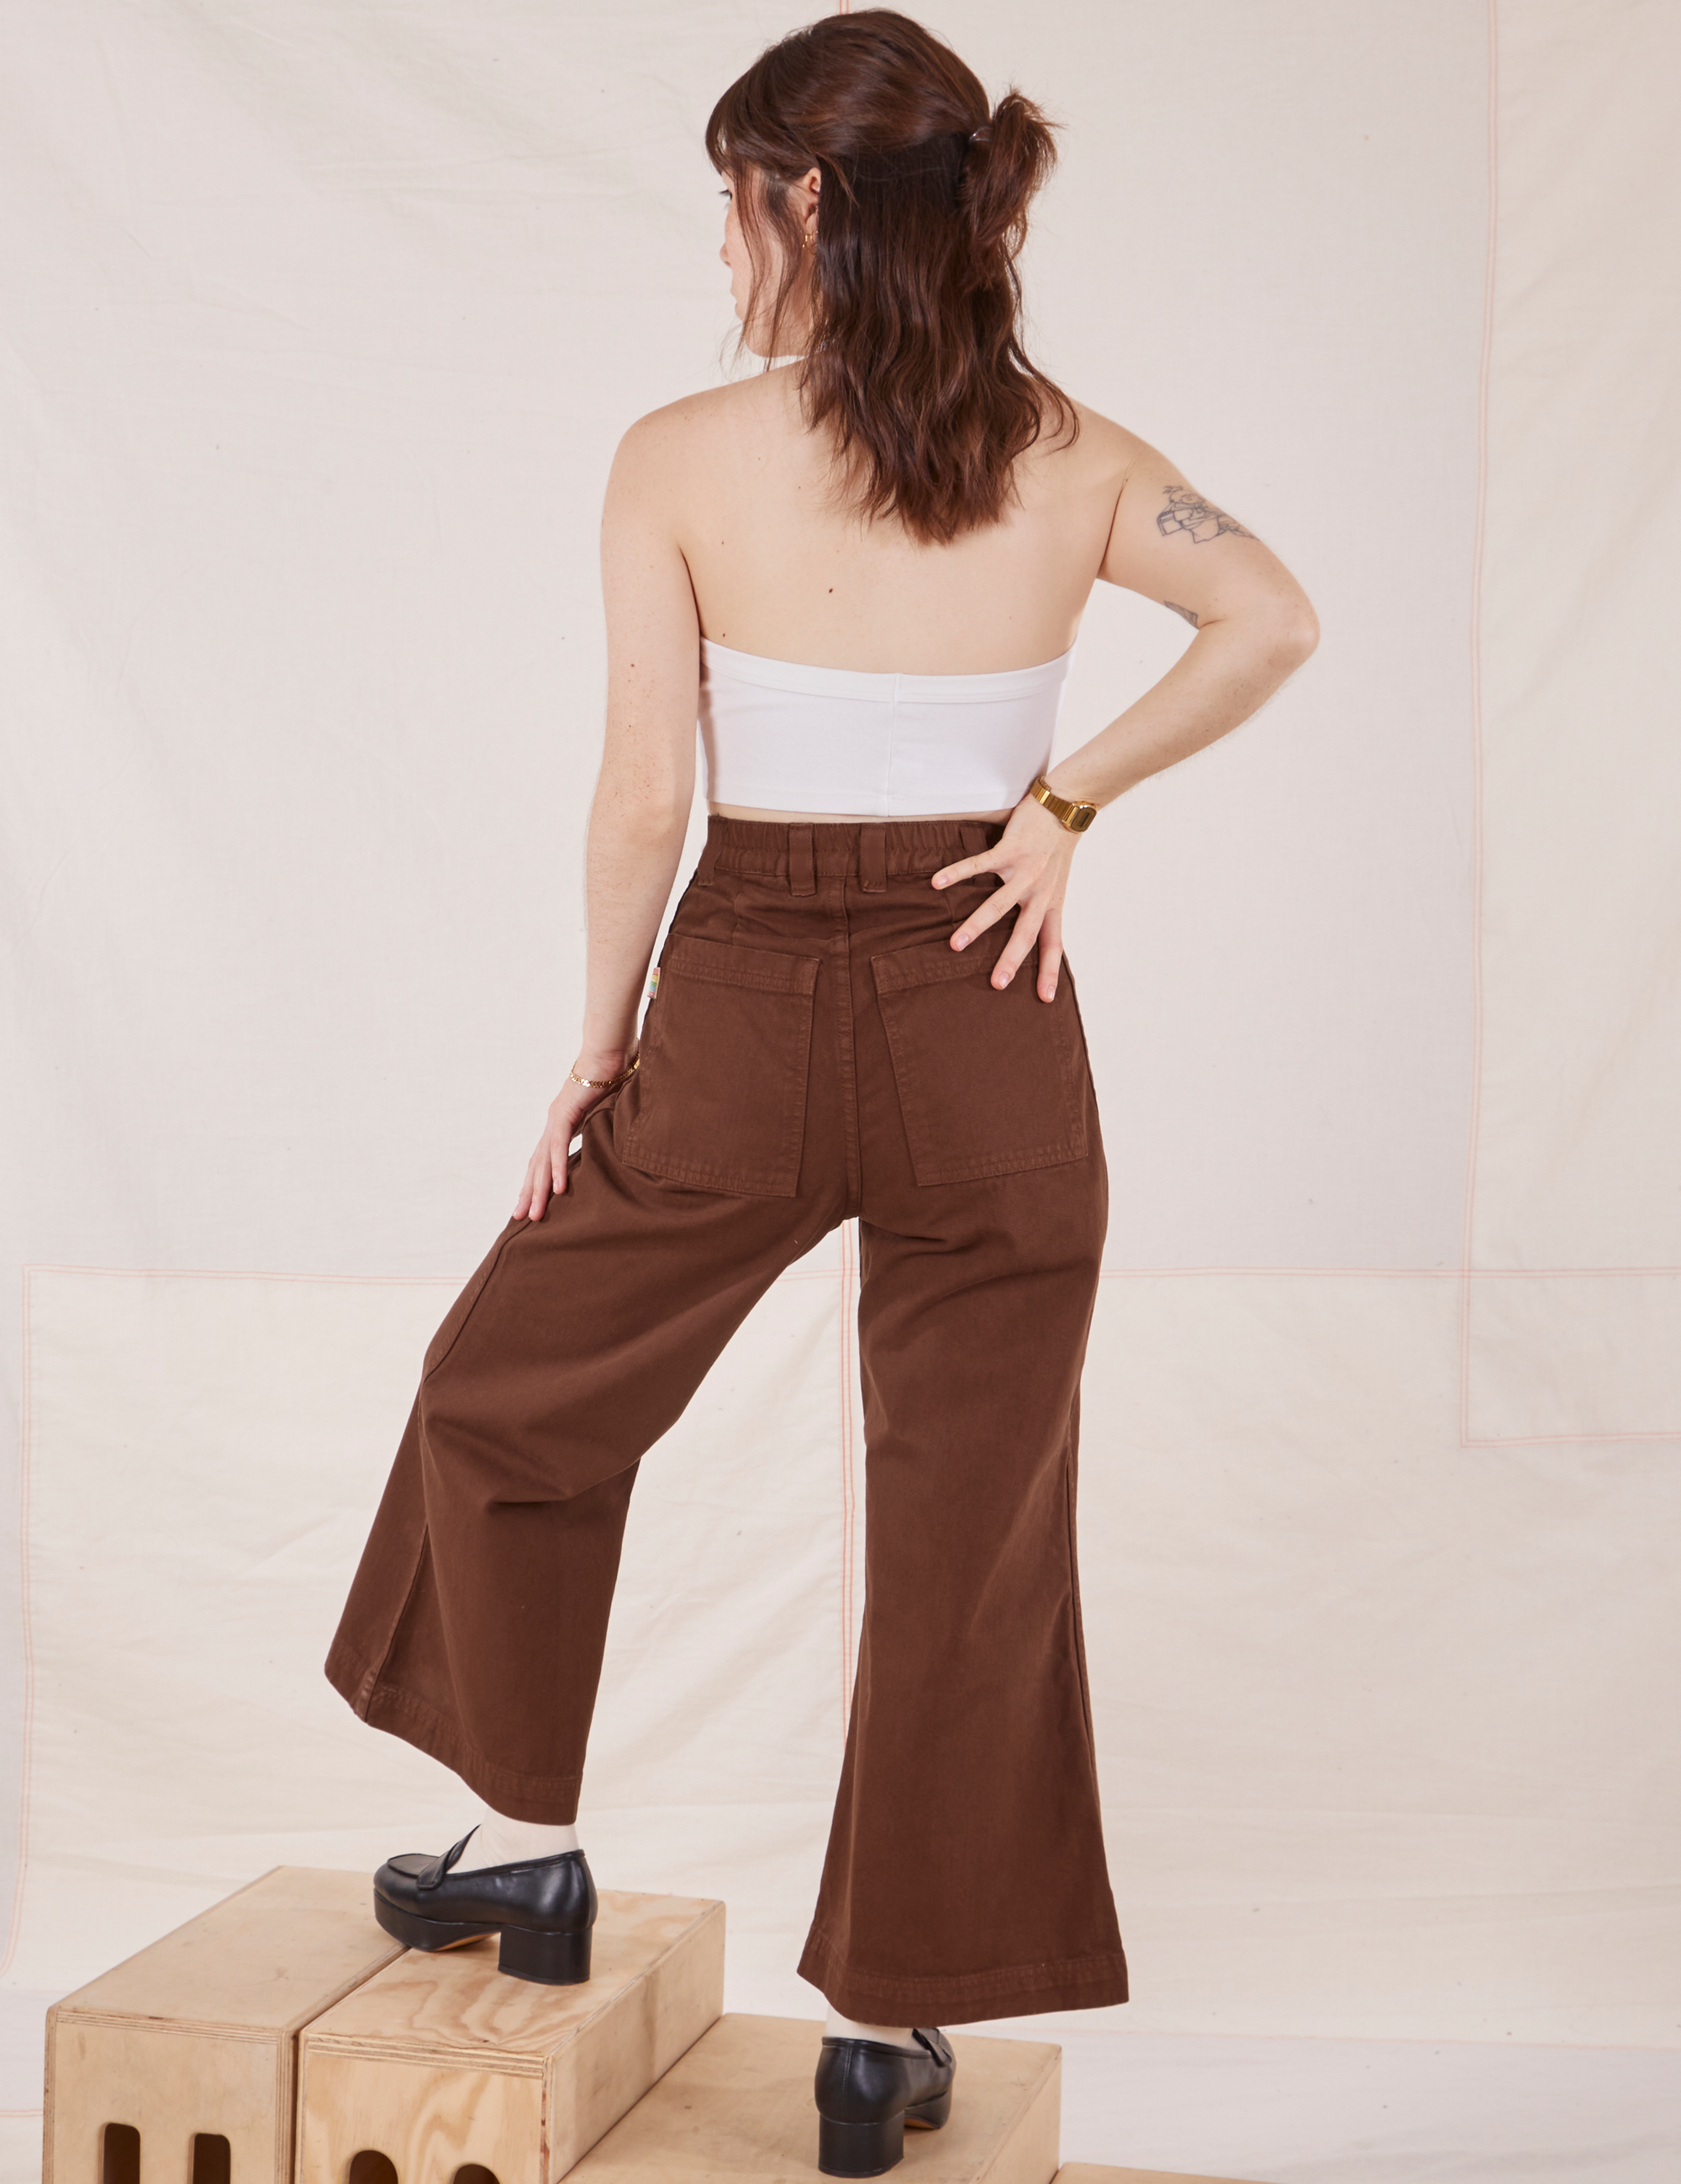 Back view of Petite Bell Bottoms in Fudgesicle Brown and vintage off-white Halter Top